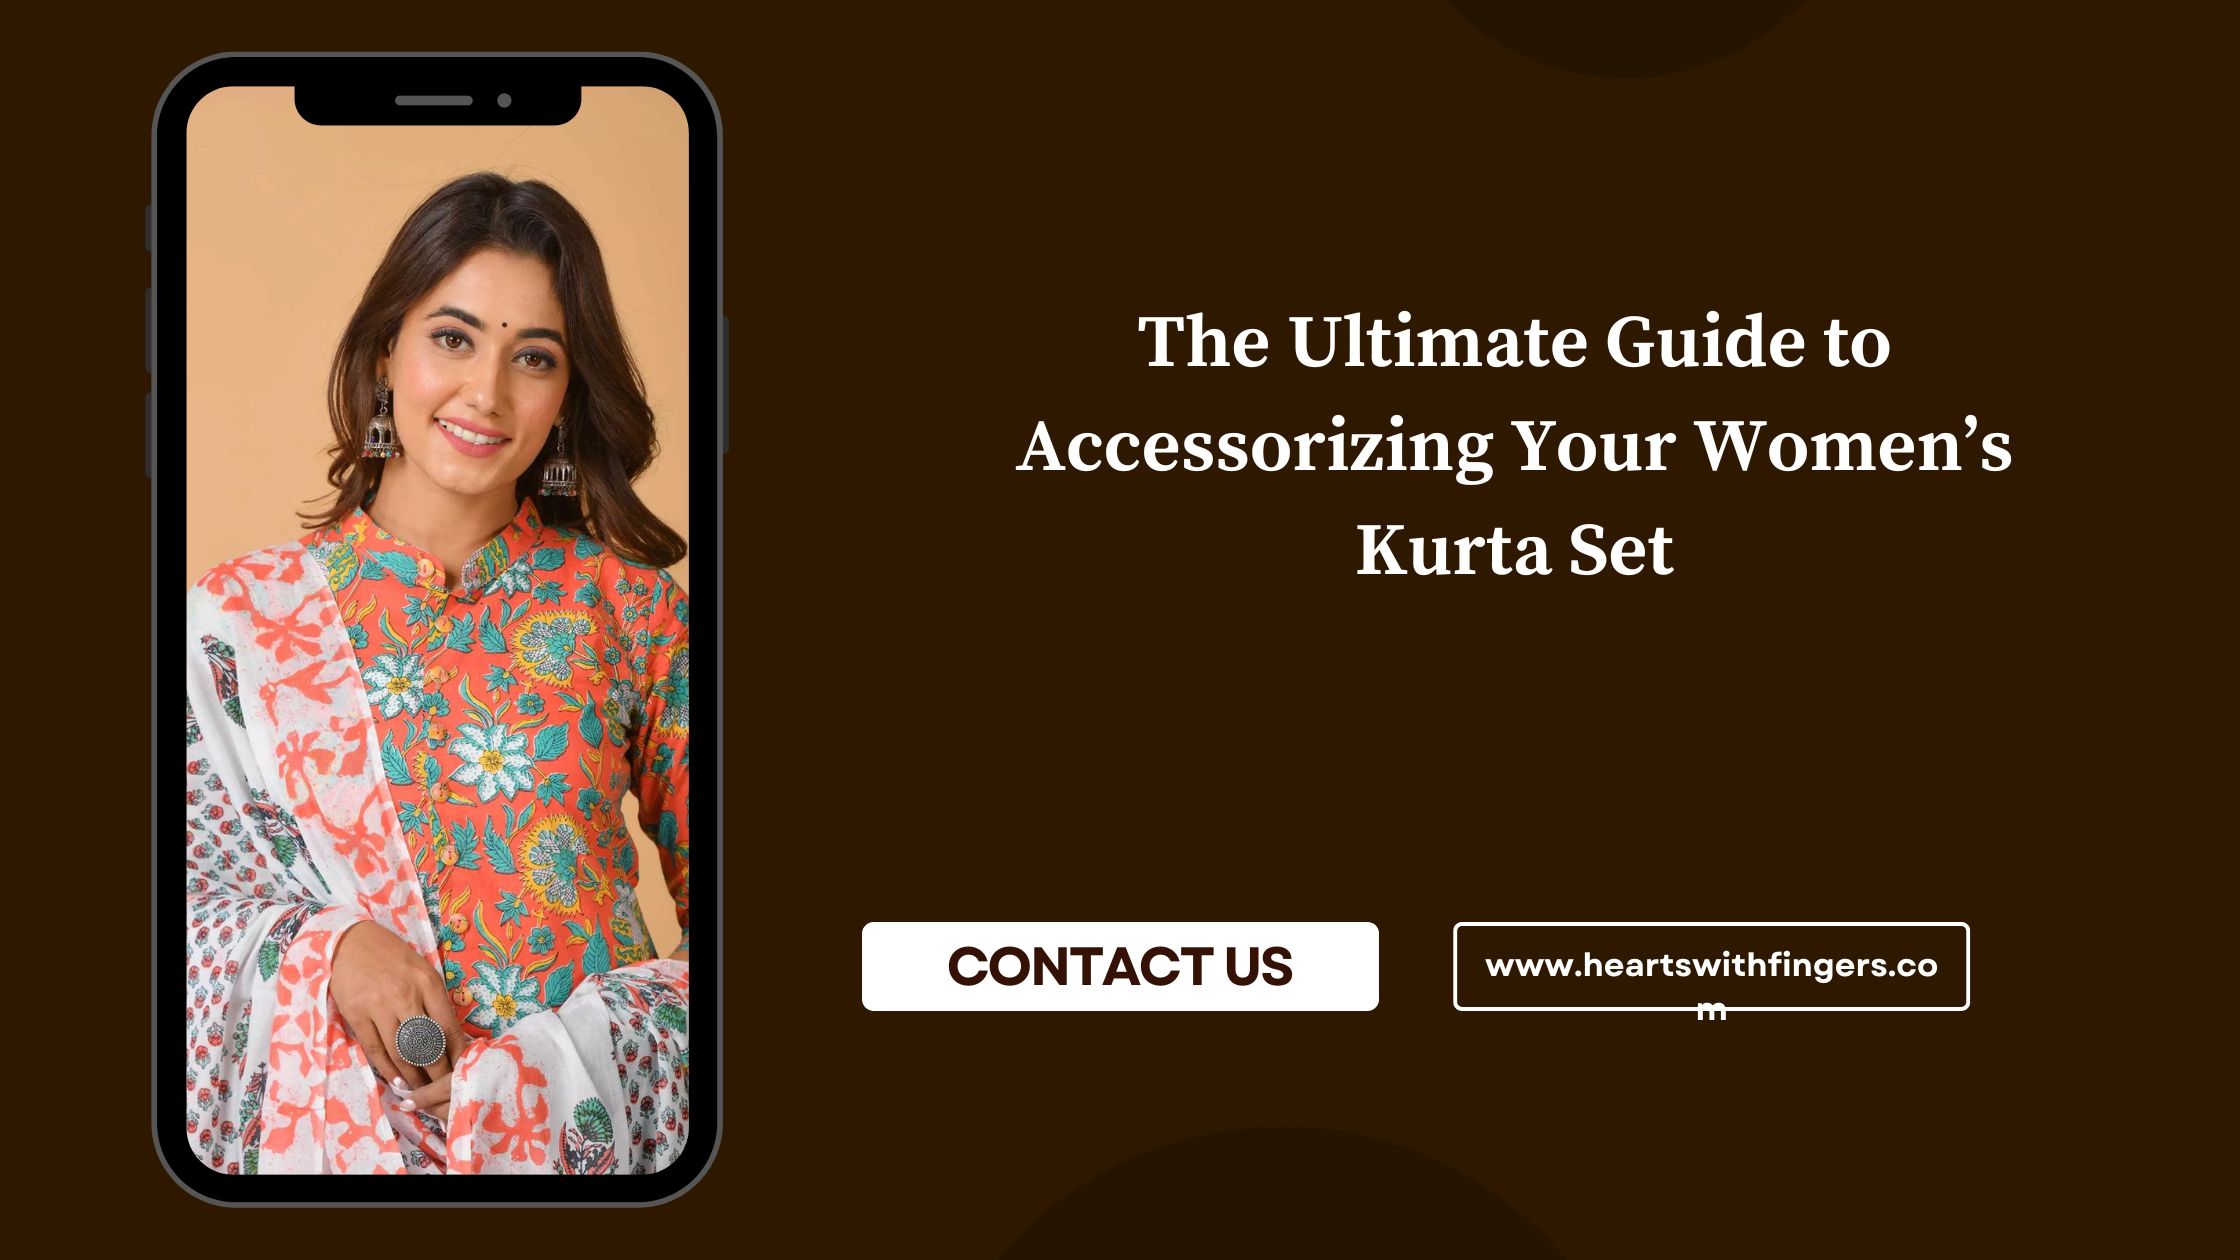 The Ultimate Guide to Accessorizing Your Women’s Kurta Set